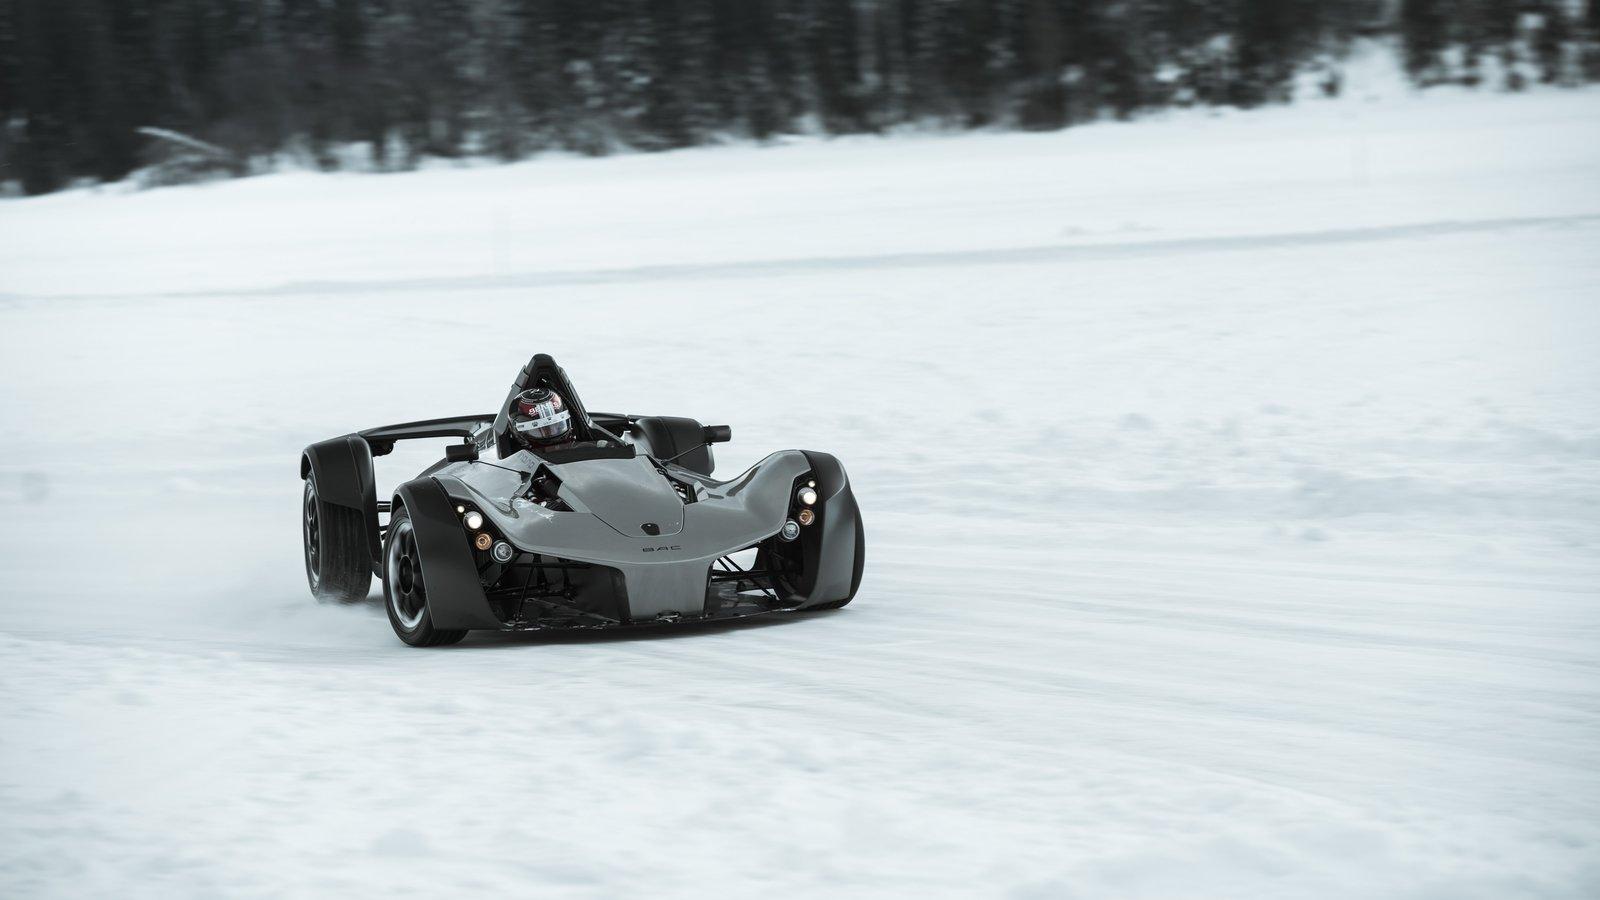 Video Of The Day: BAC Mono Ice Driving Experience 2018 In Sweden